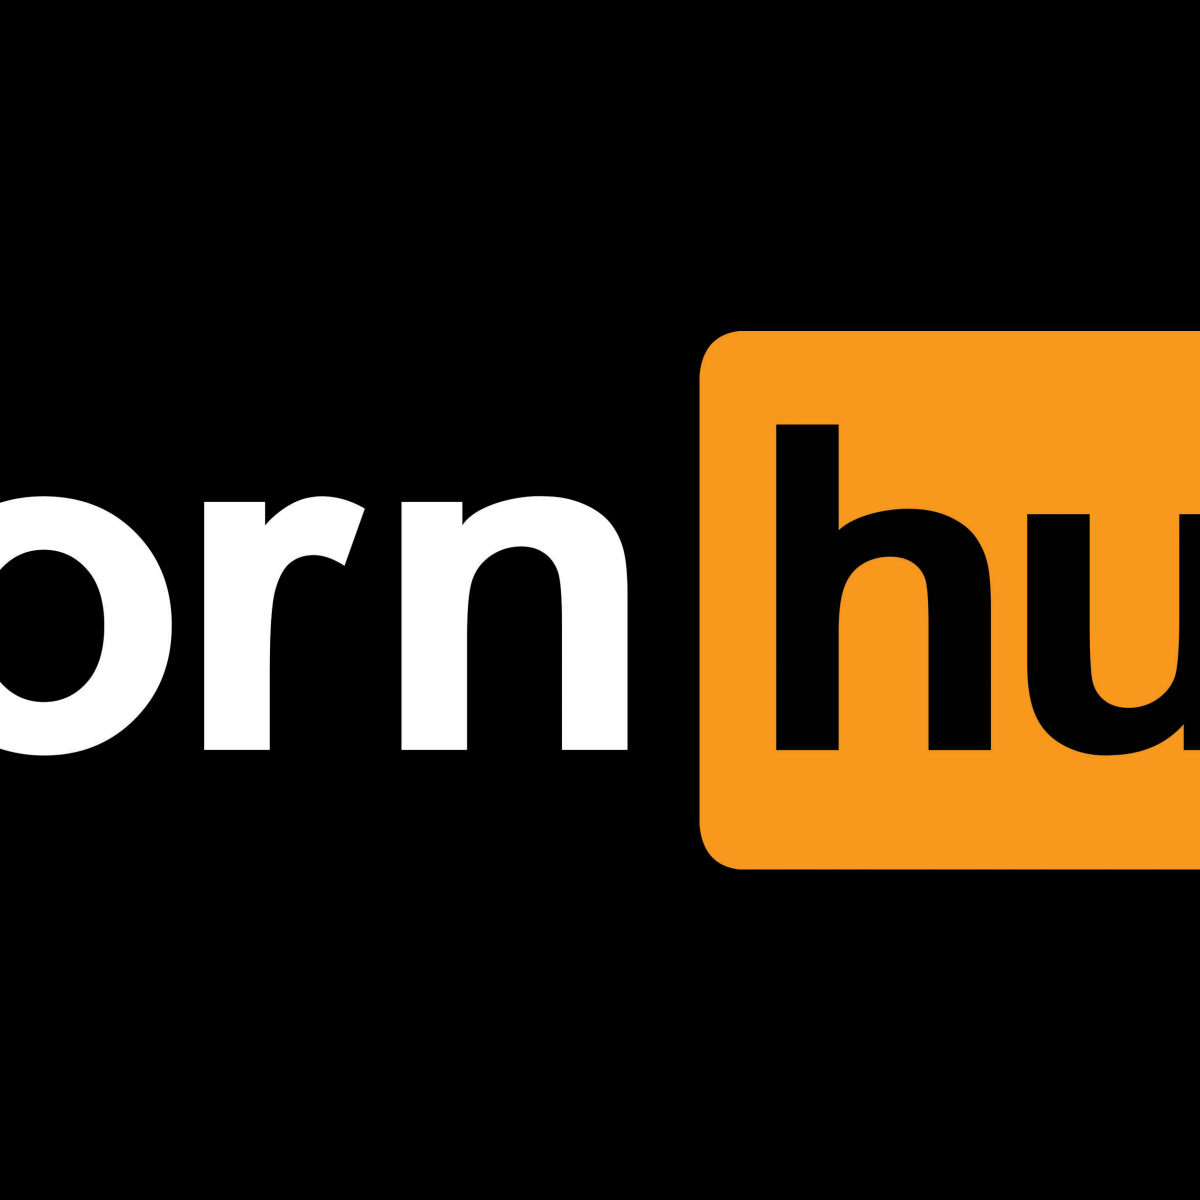 ari peltola recommends Get Paid From Pornhub